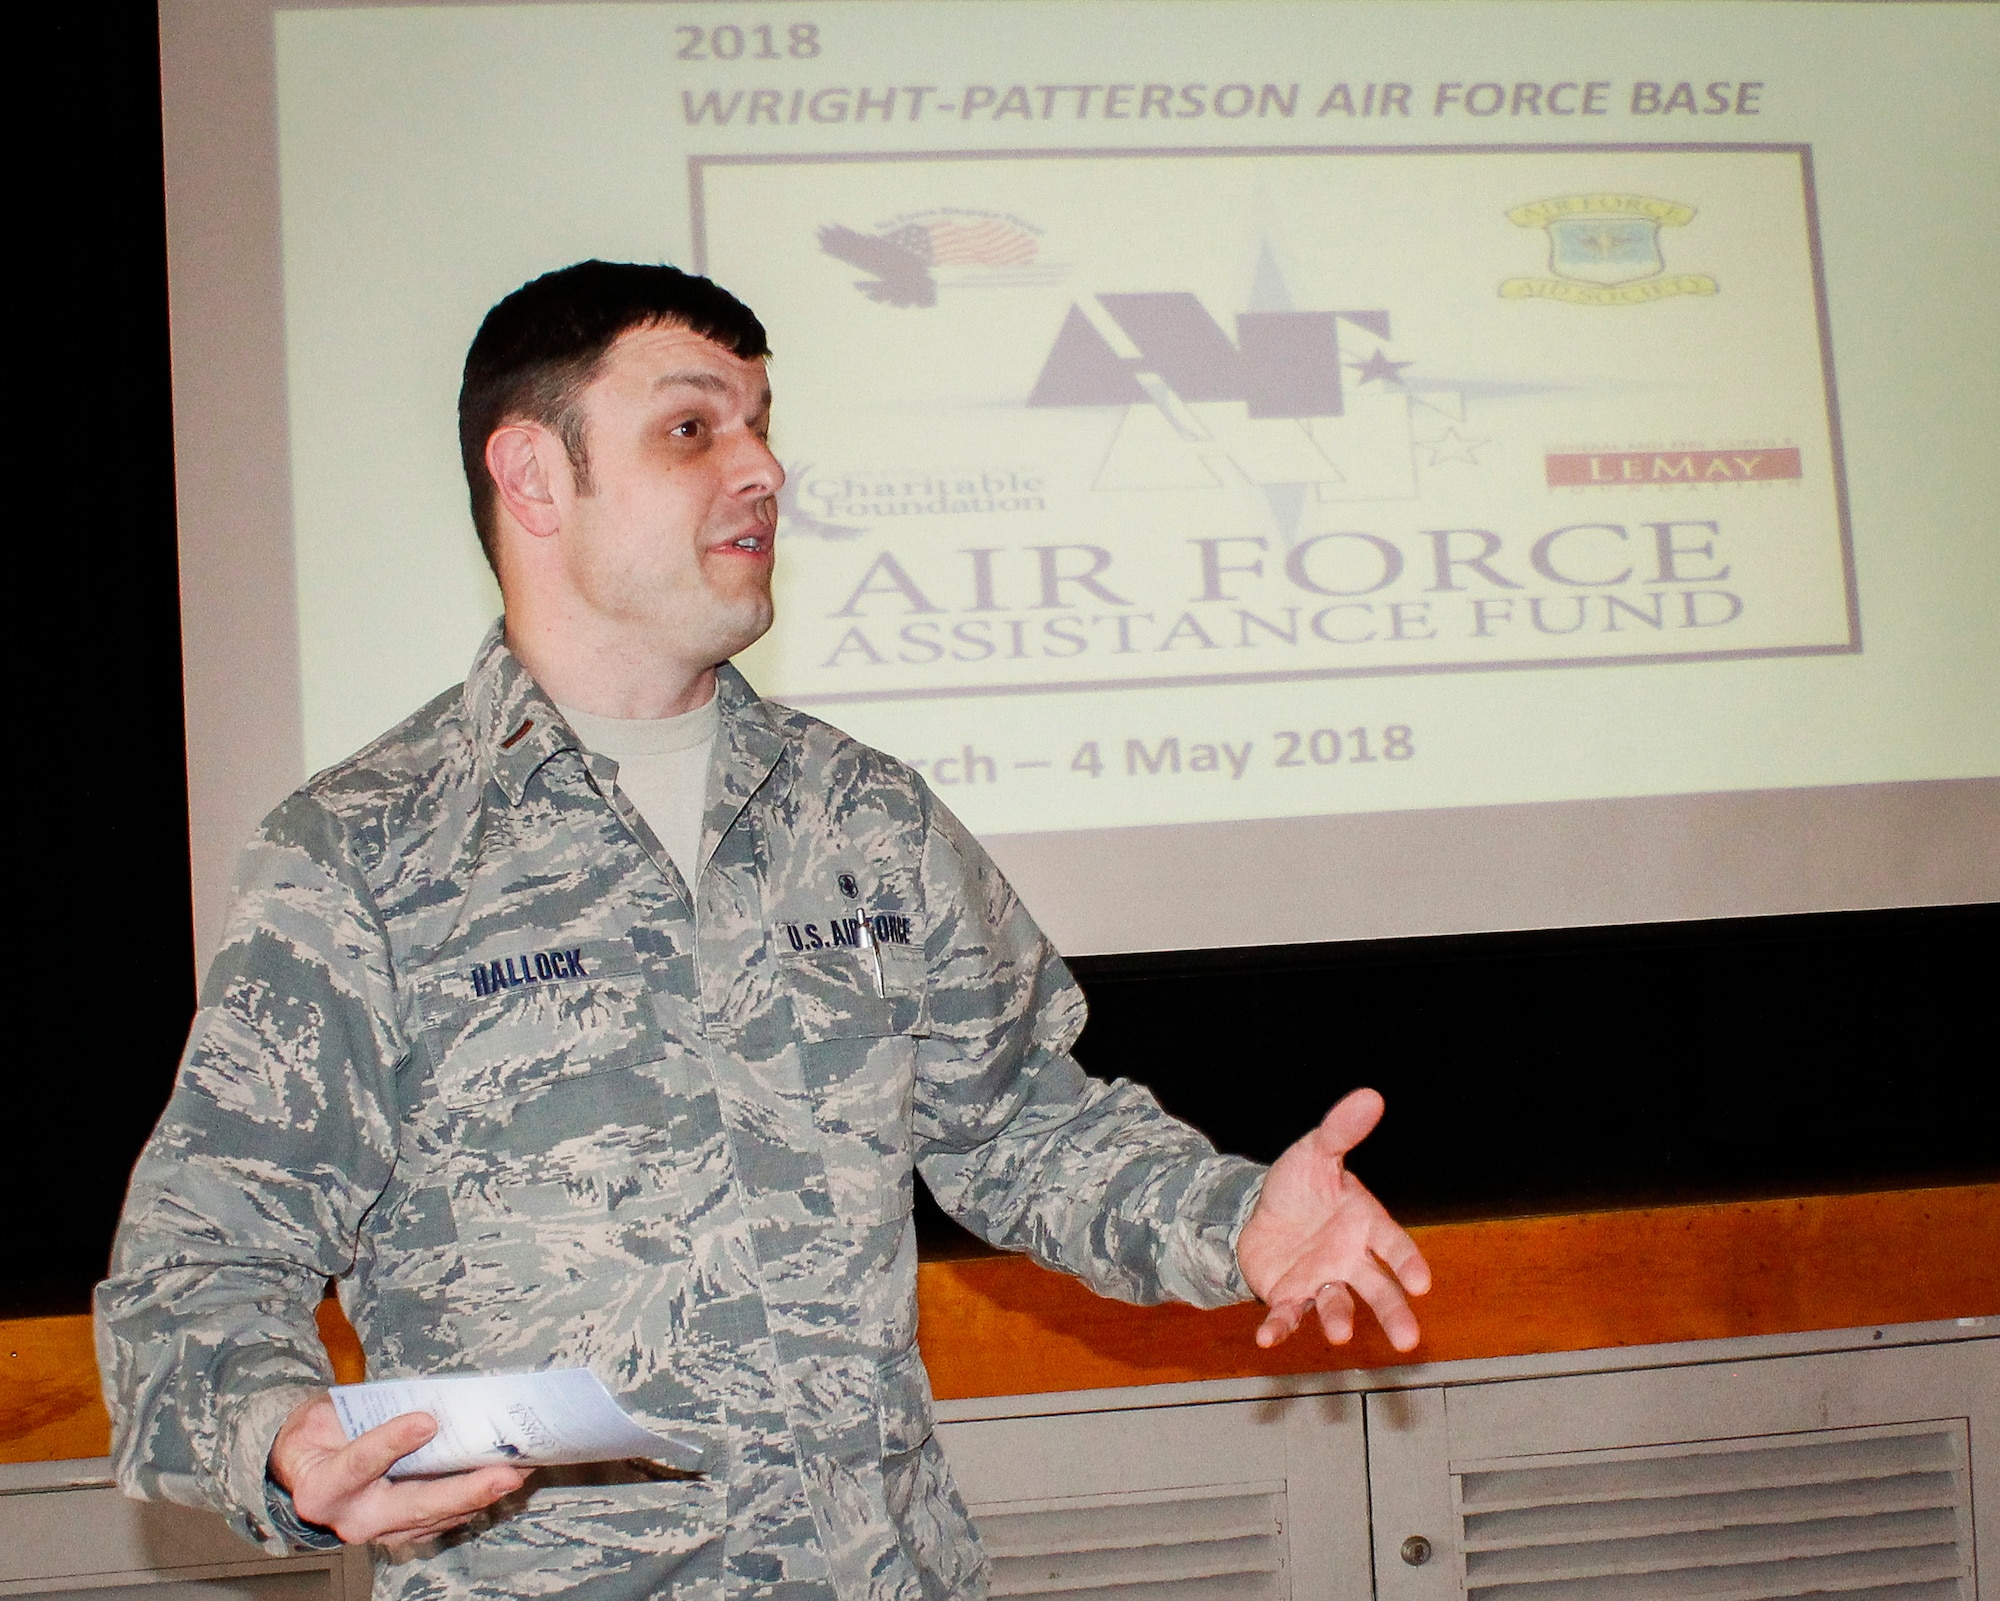 Air Force Assistance Fund drive kicks off